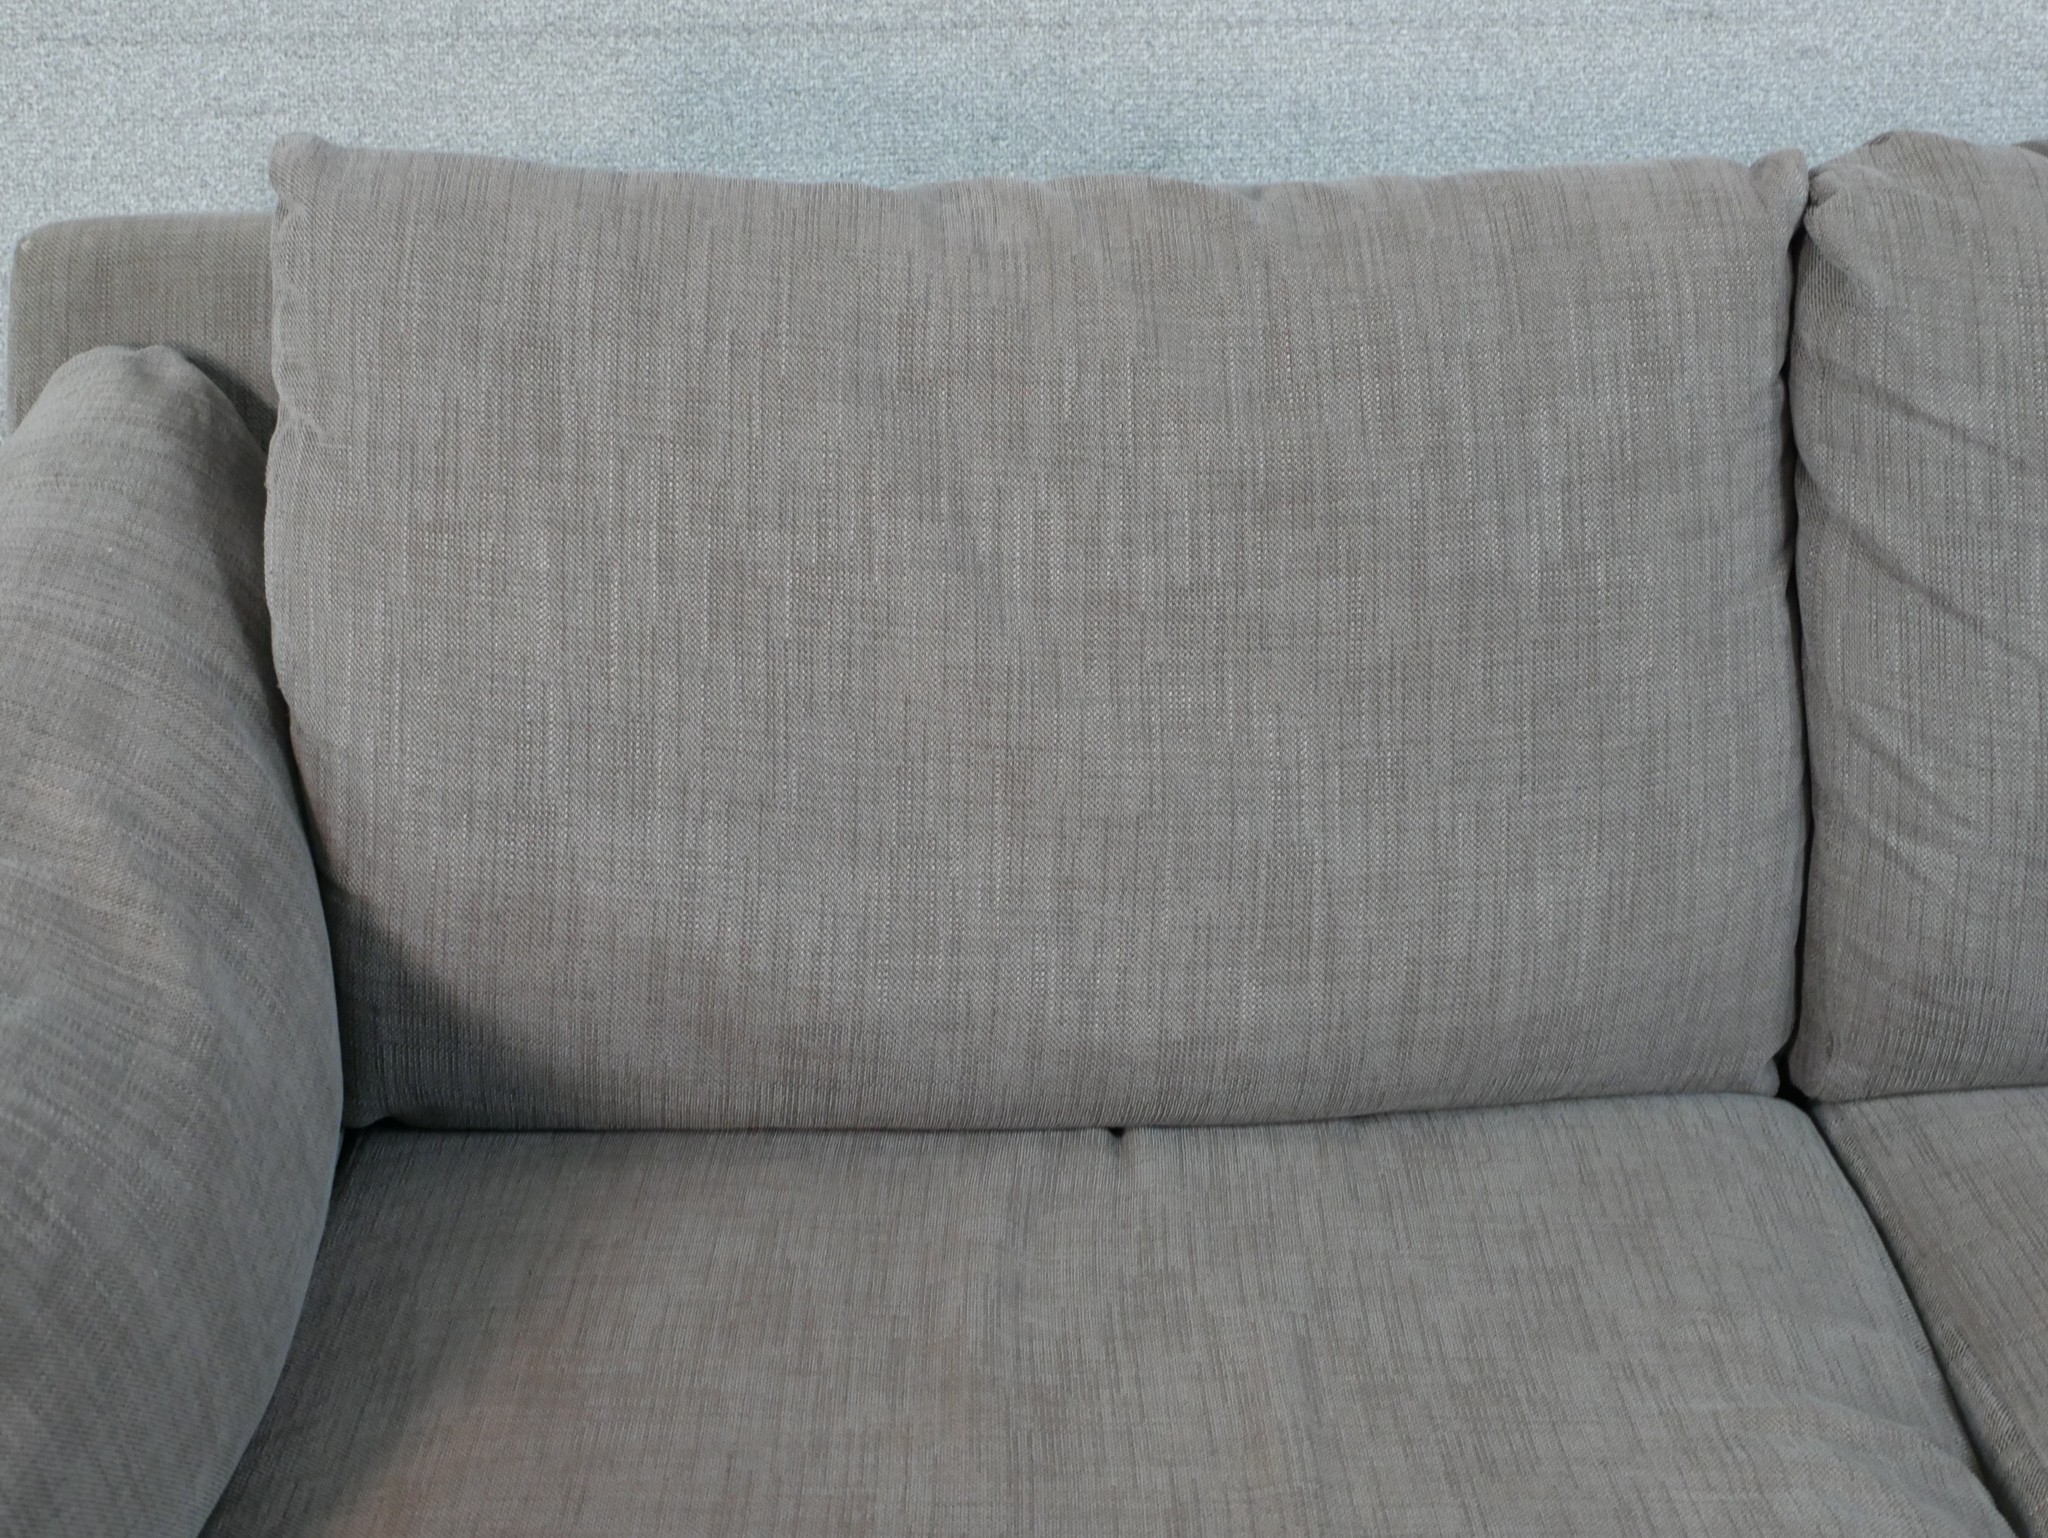 A John Lewis two seater sofa, upholstered in grey fabric, with oak arms and legs. H.77 W.192 D.88cm - Image 7 of 8